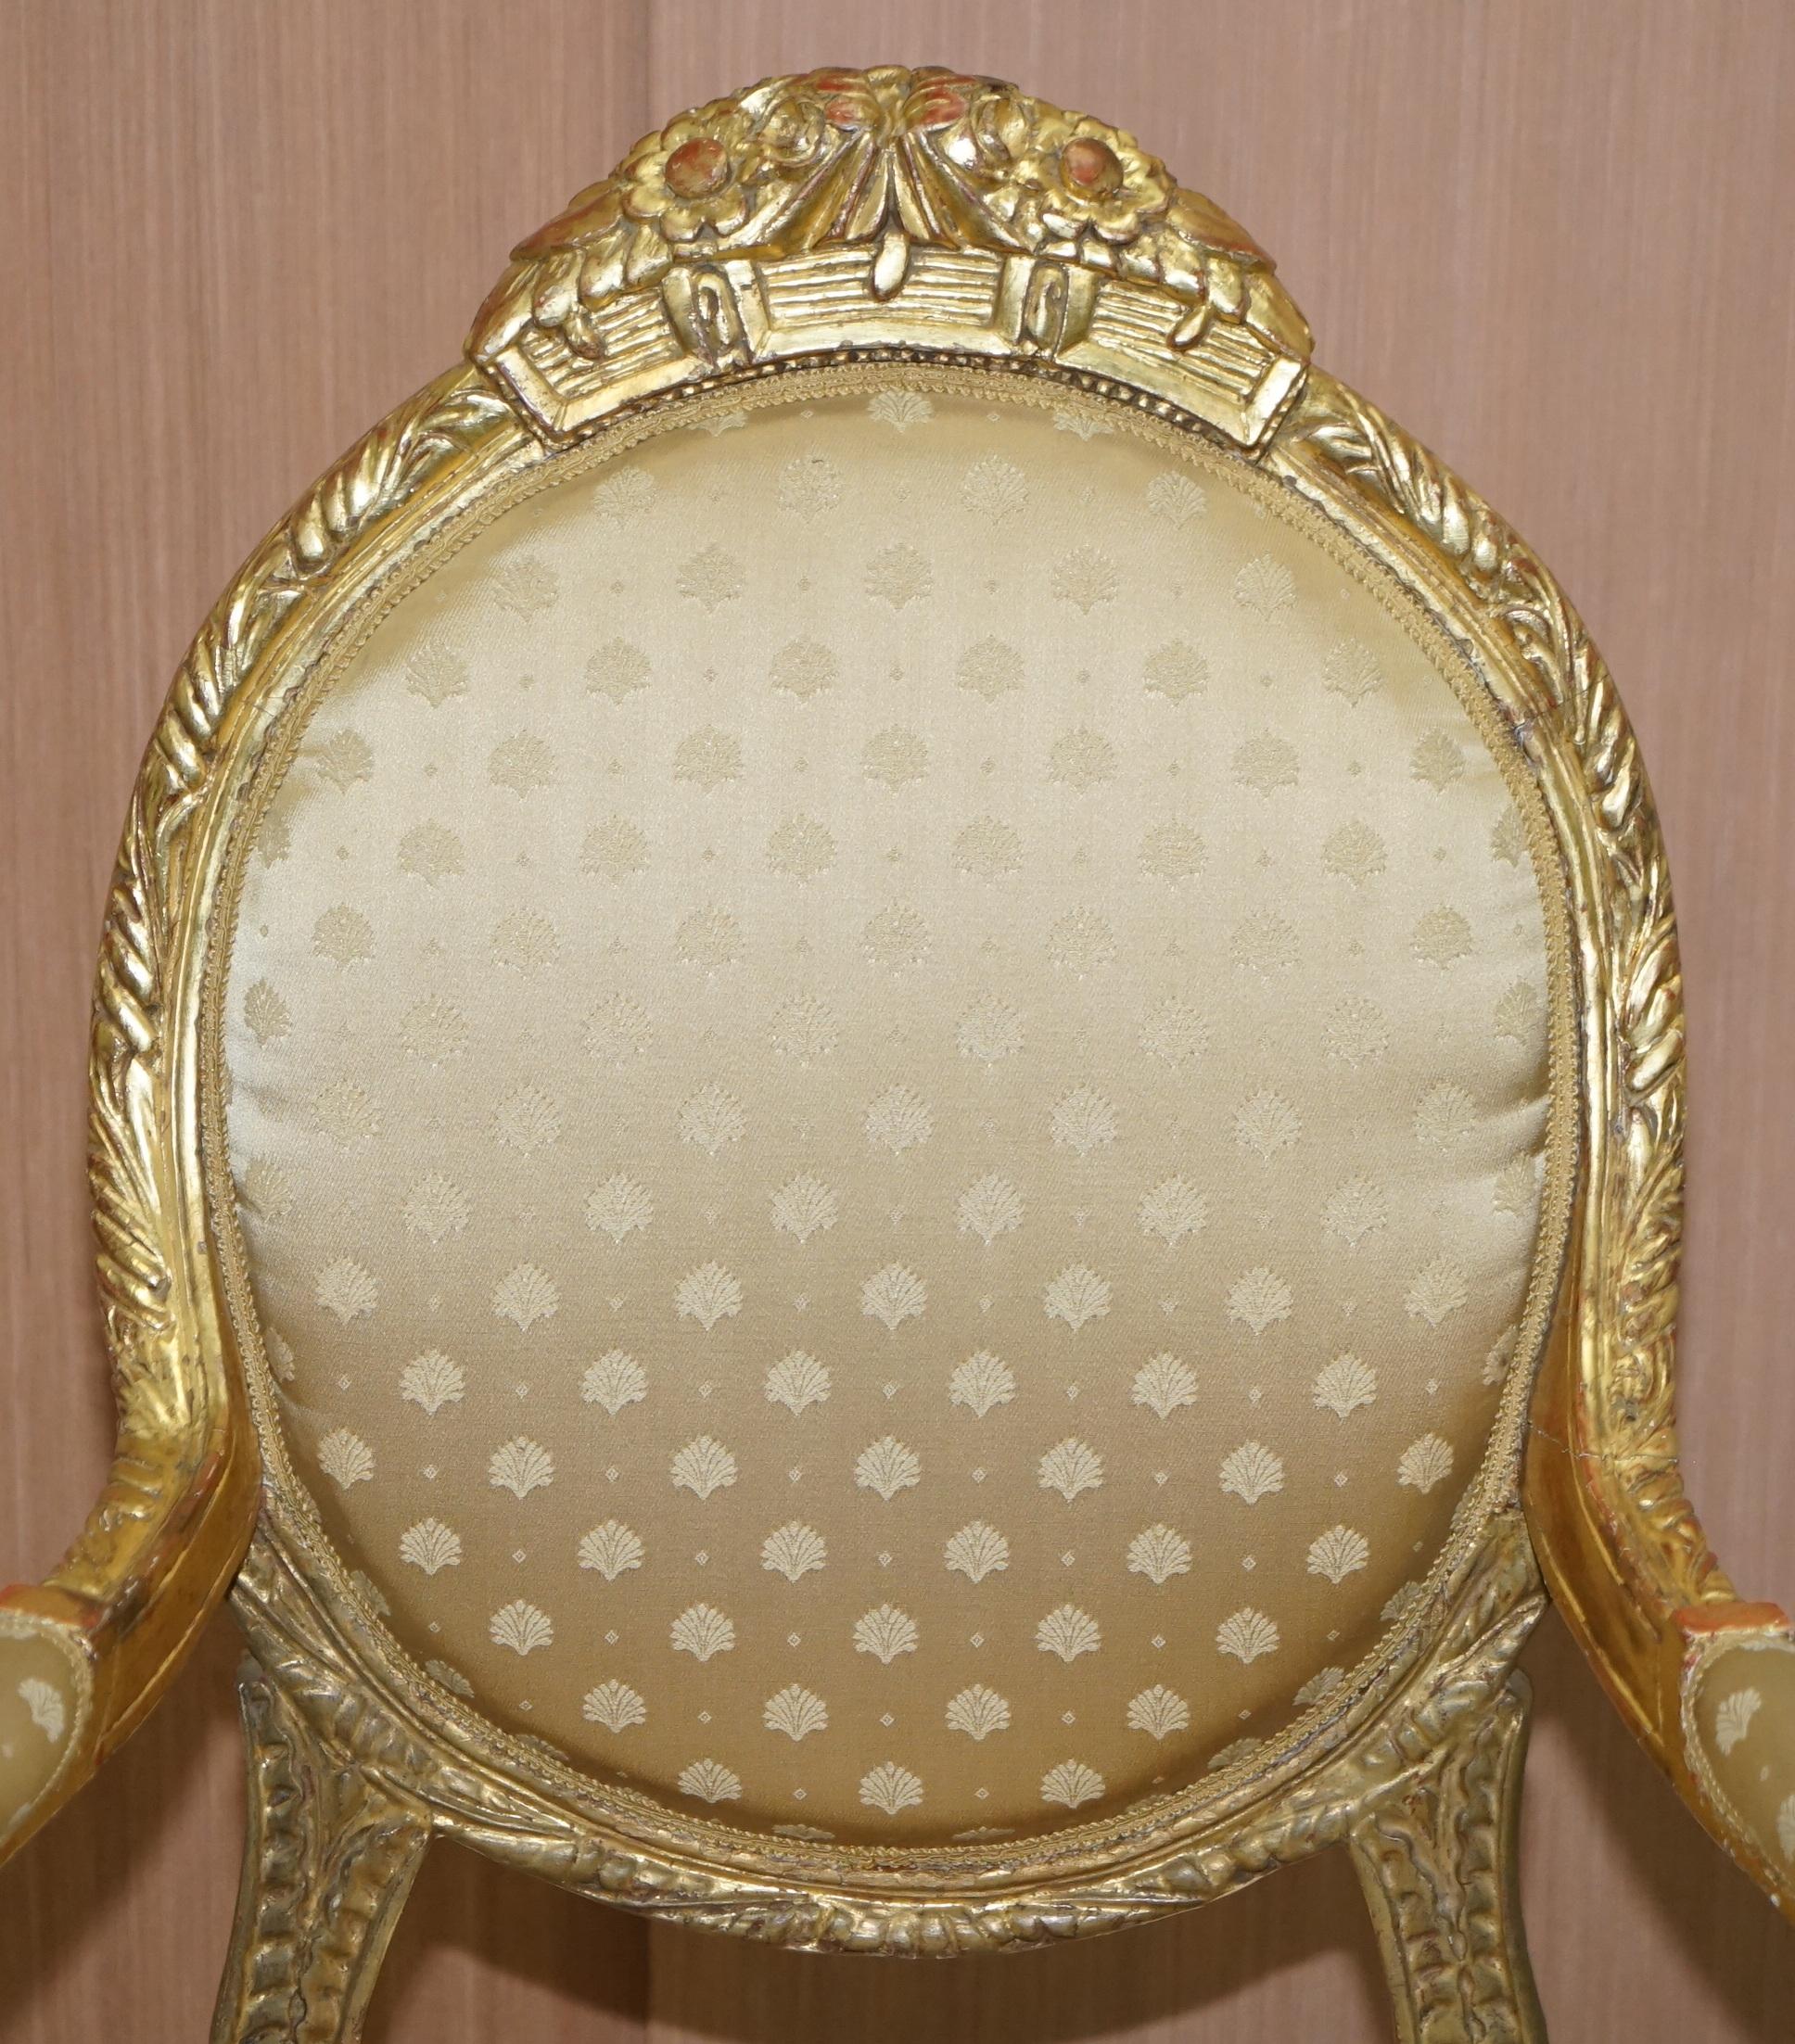 Late 19th Century Rare French Giltwood Napoleon III circa 1870 Salon Throne Armchair Part of Suite